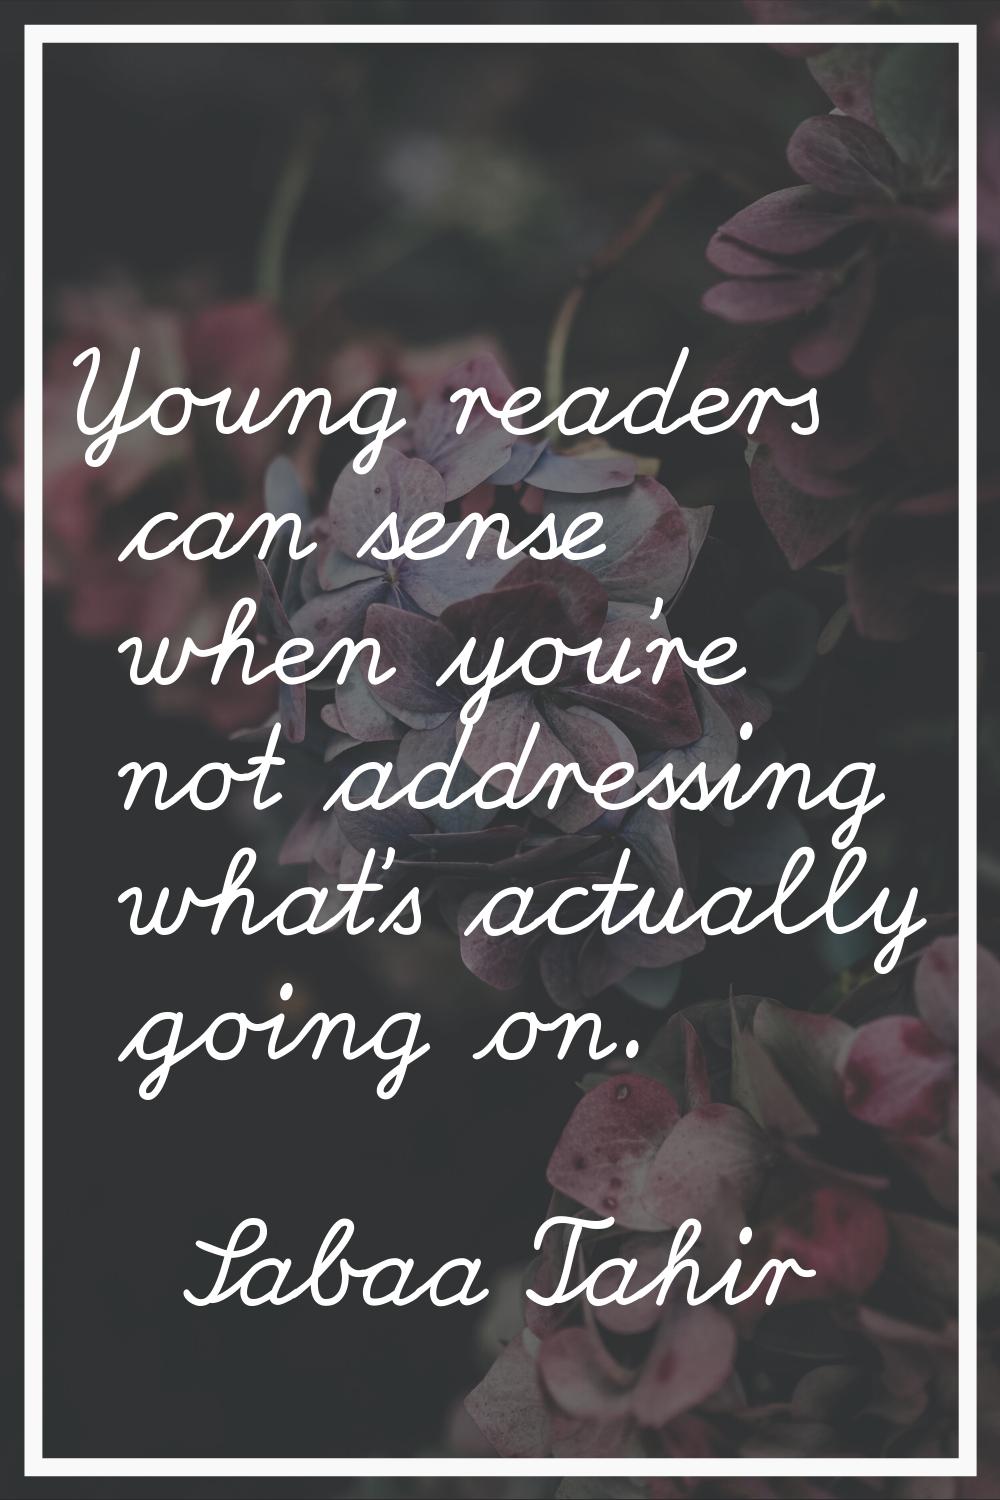 Young readers can sense when you're not addressing what's actually going on.